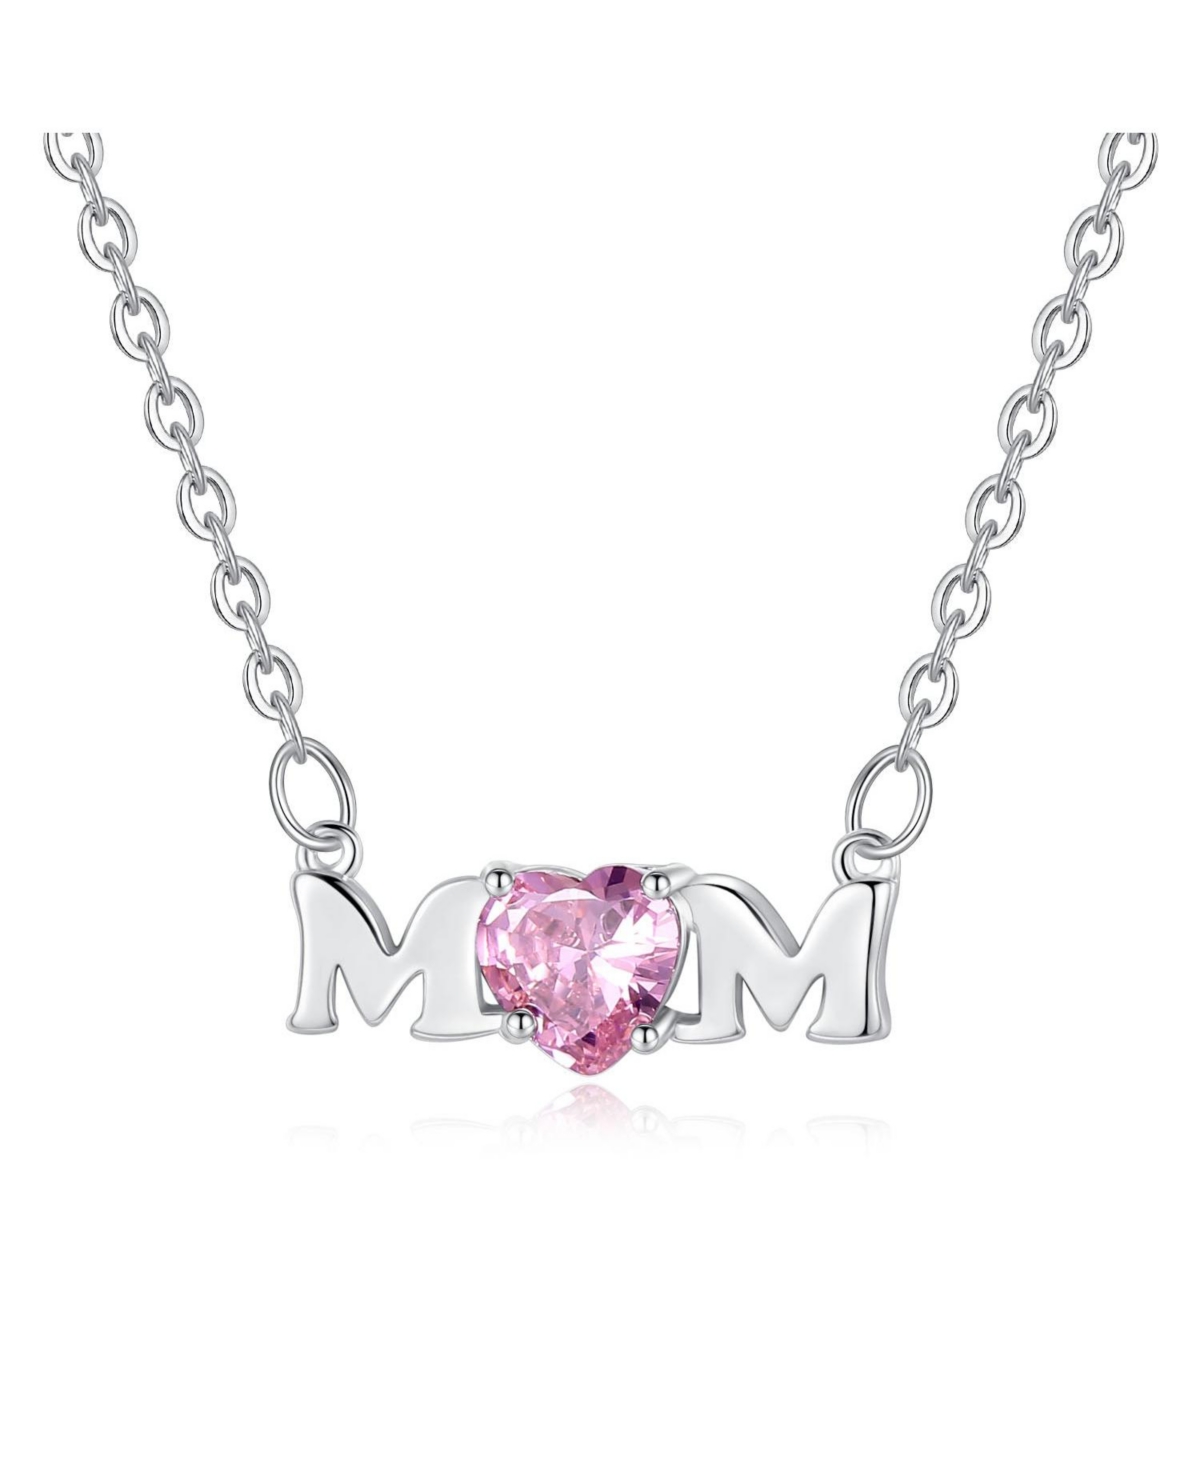 Mom Necklace with Pink Cubic Zirconia - Silver